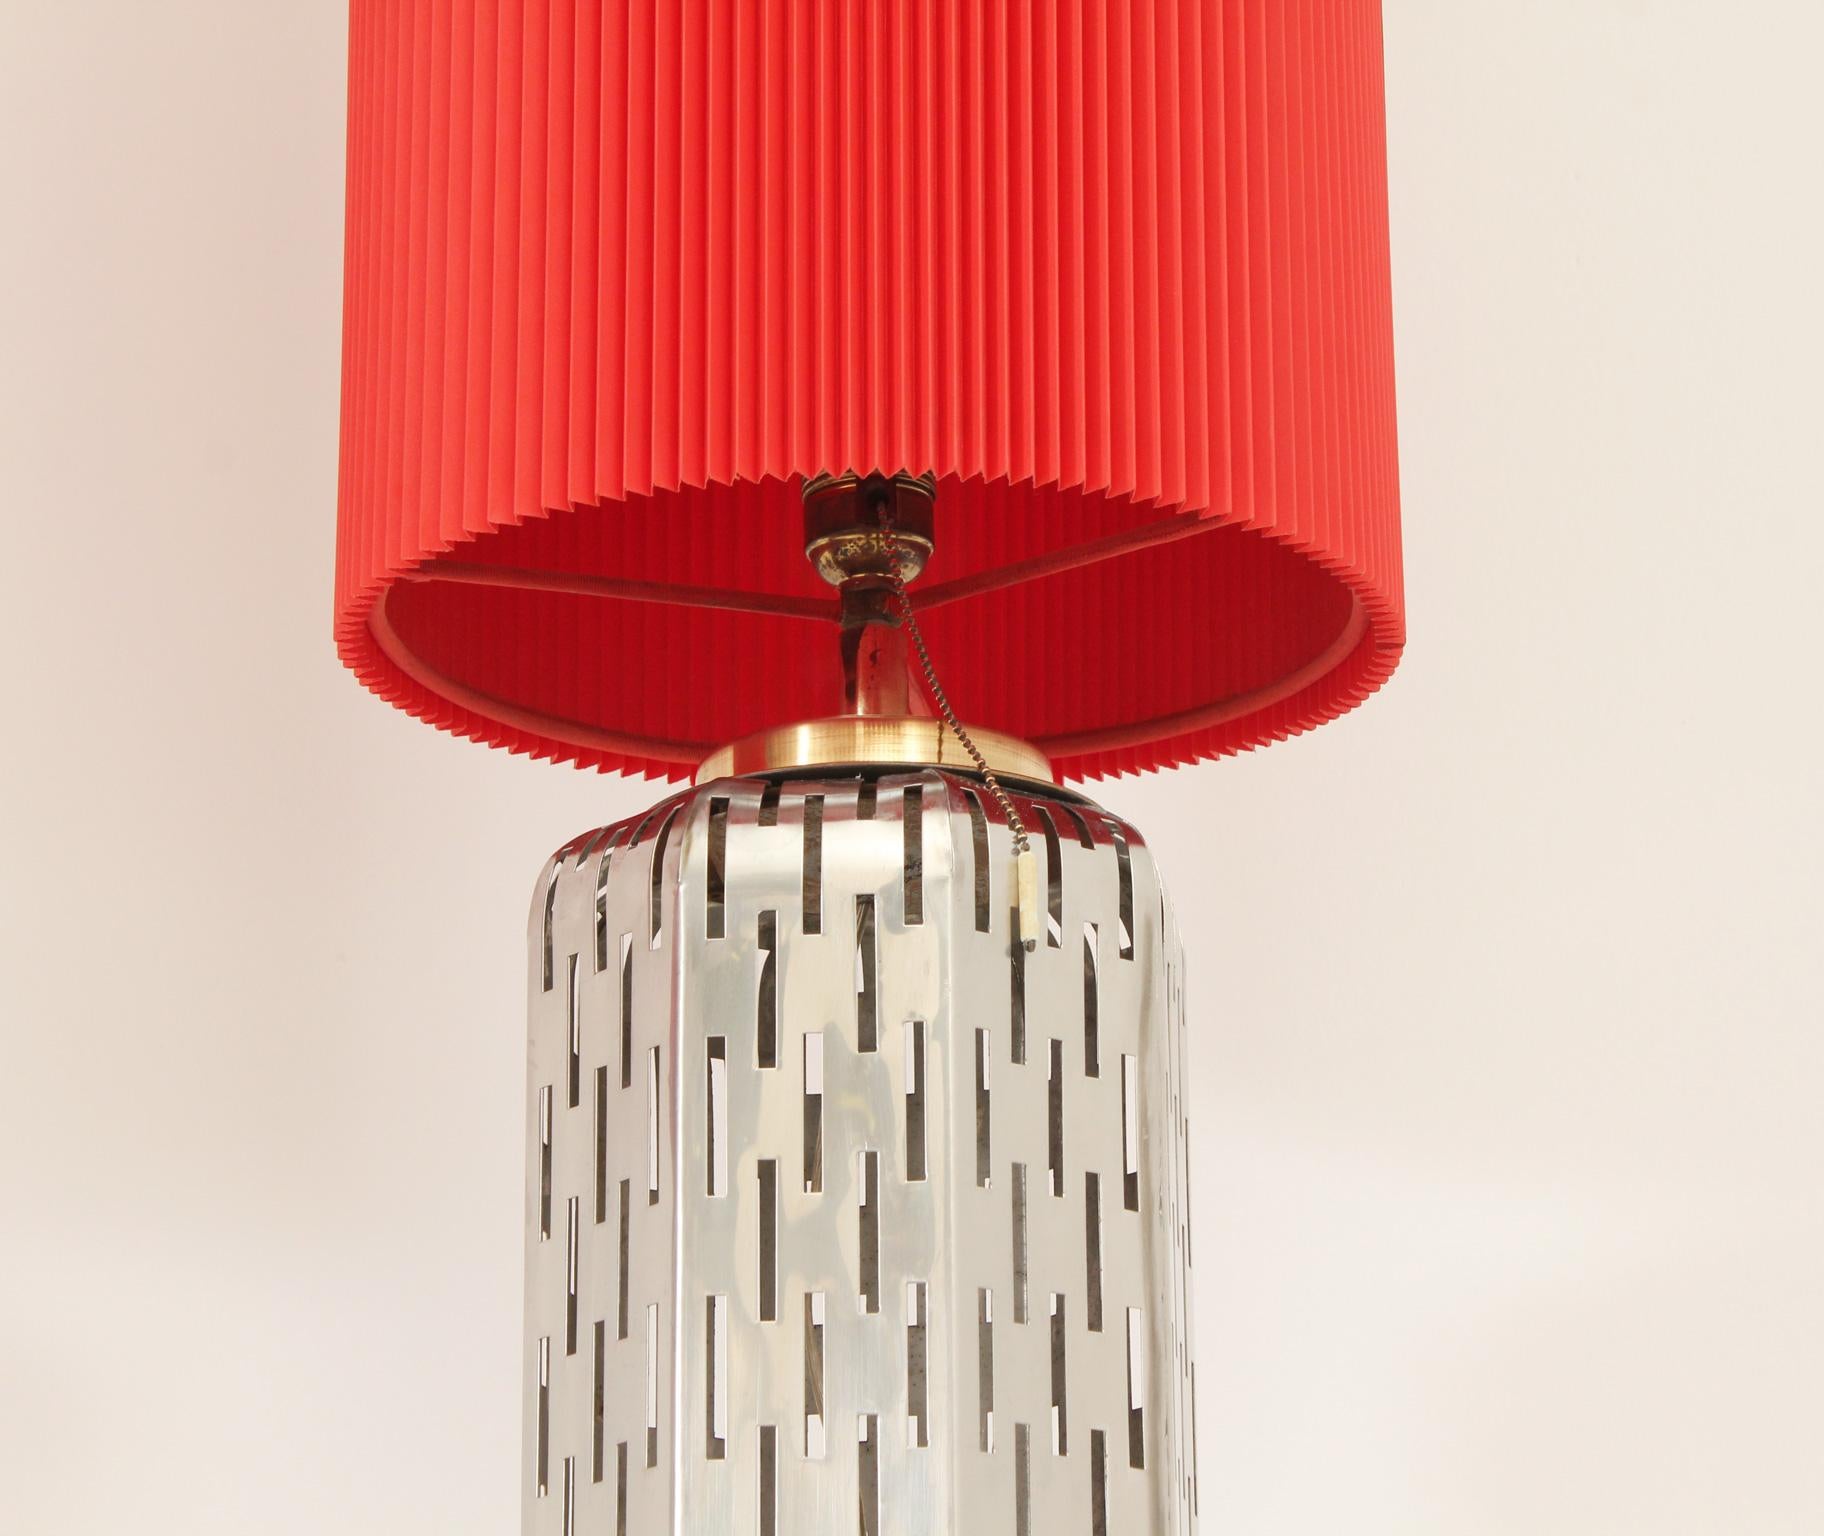 Spanish Pair of Large Table Lamps in Perforated Steel, Spain, 1960's For Sale